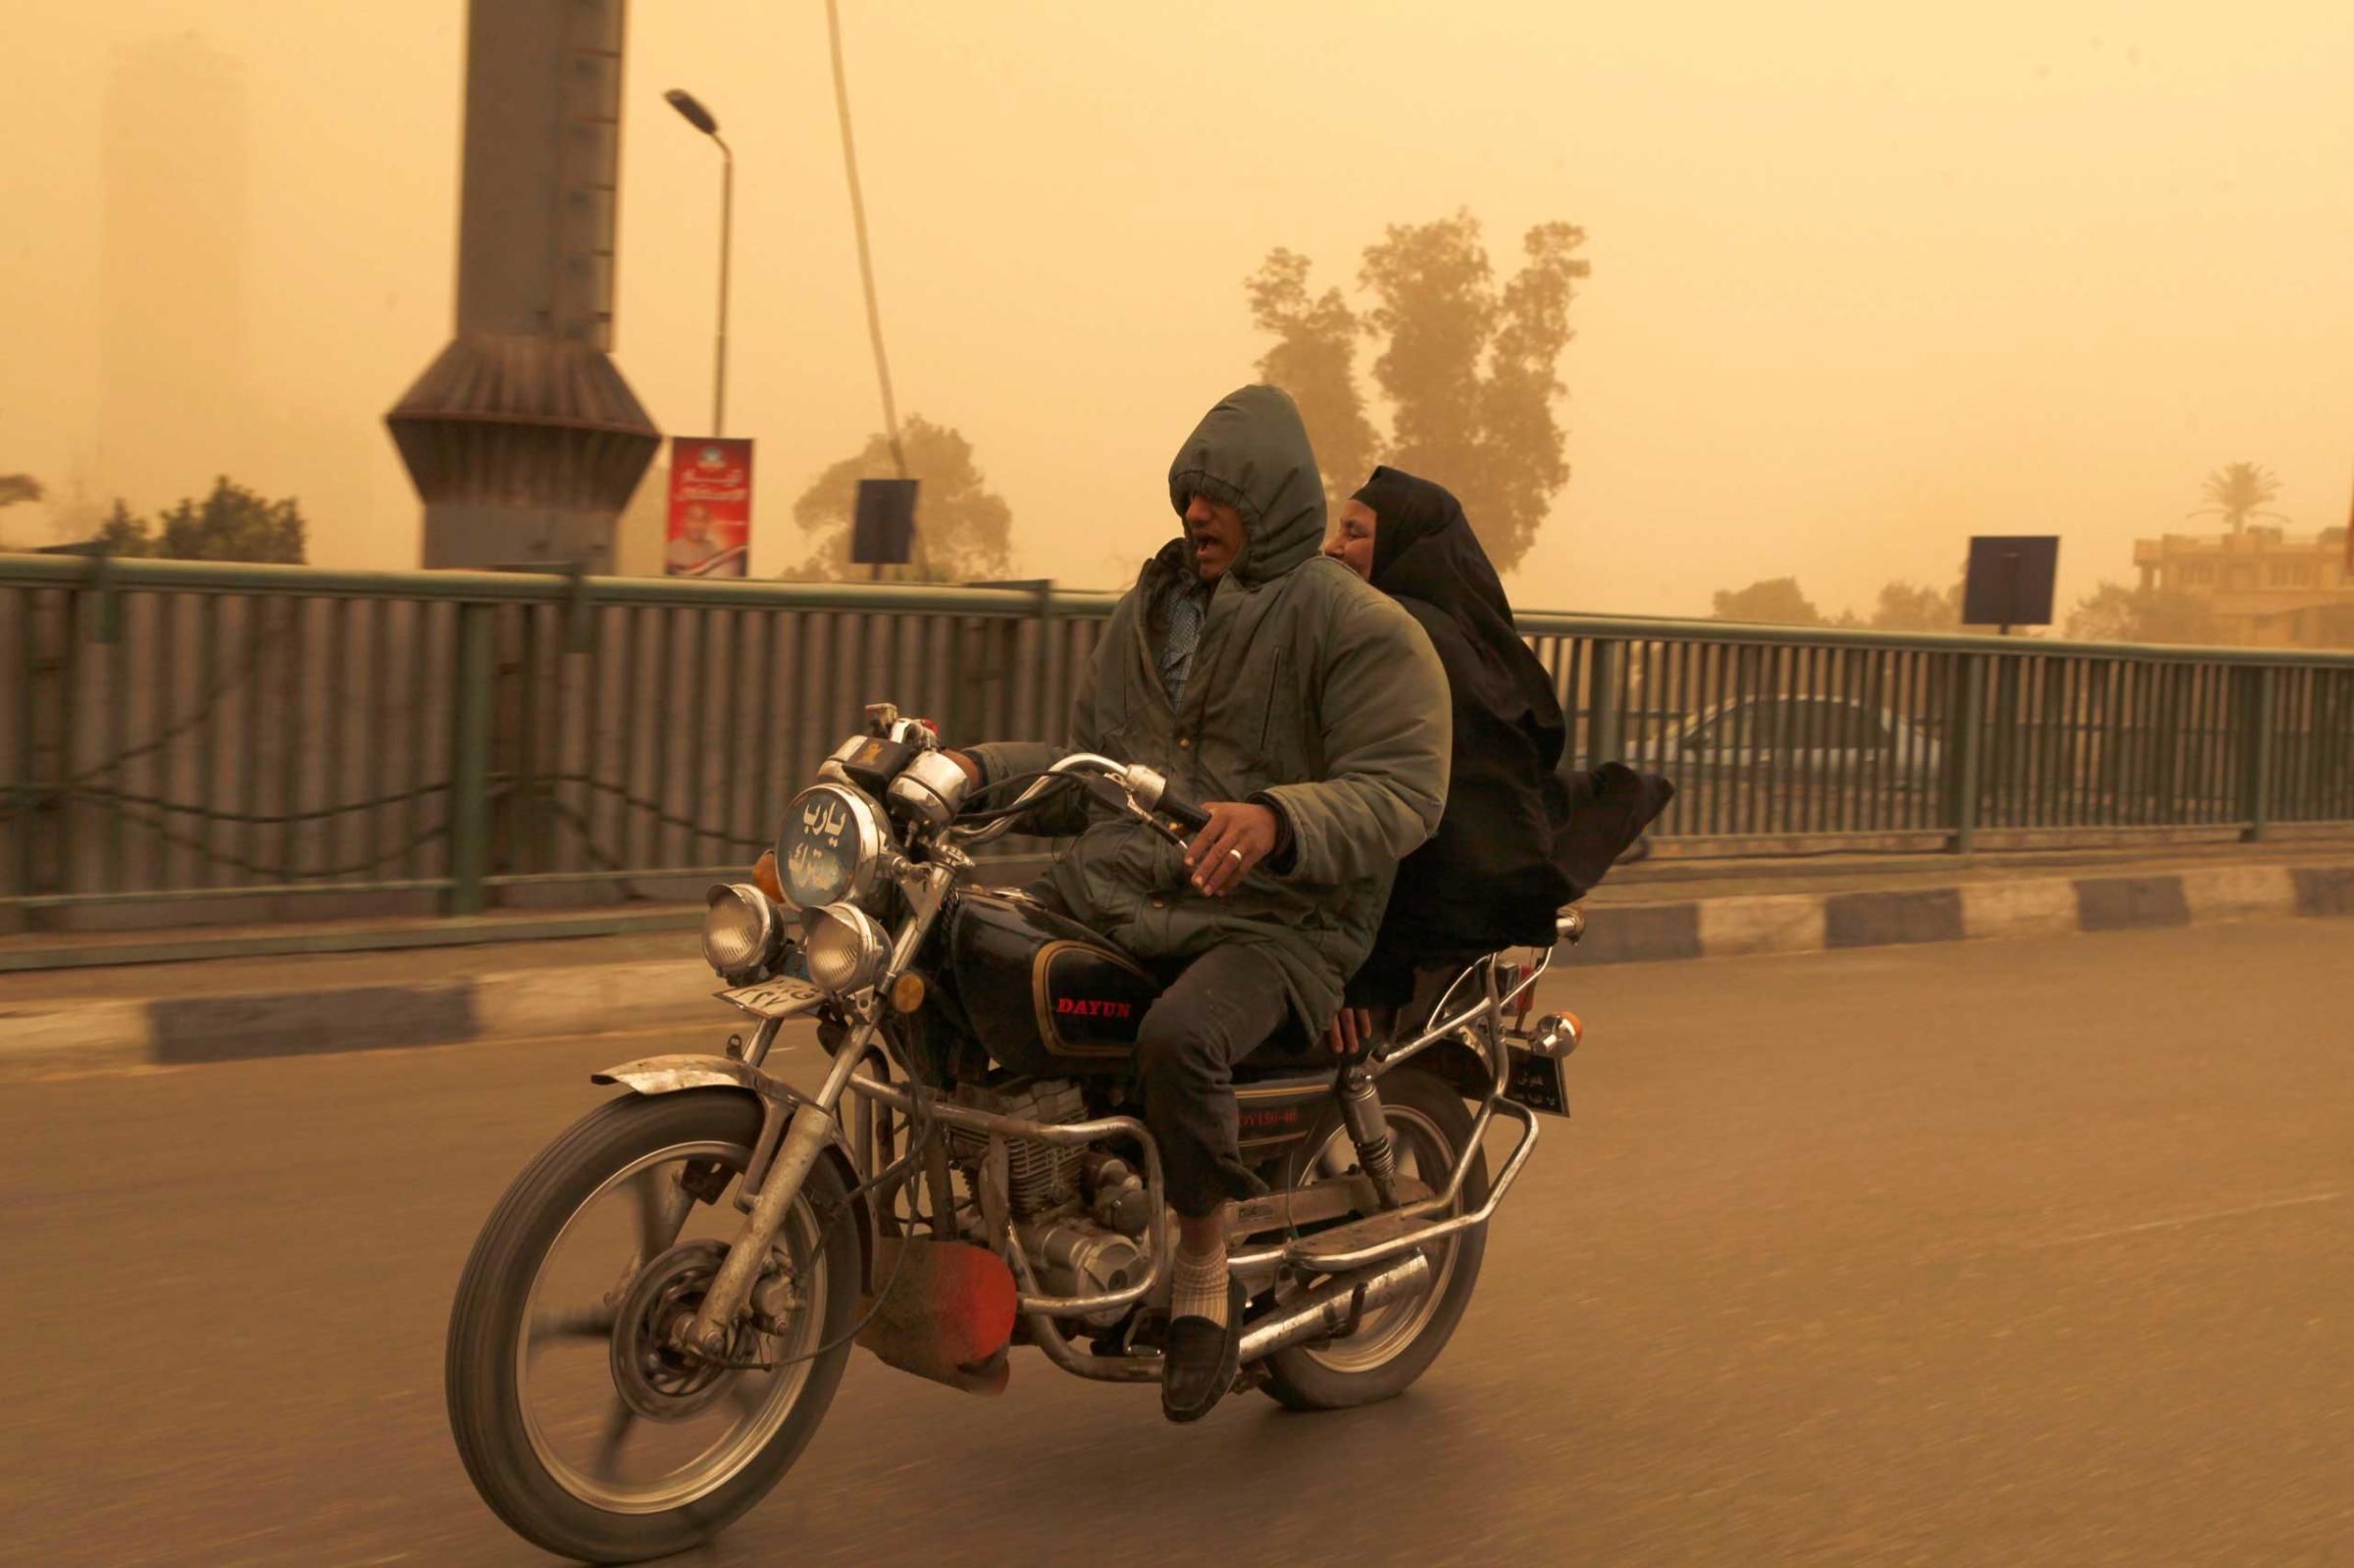 A man and a woman ride on a motorcycle over a bridge during a sand storm in Cairo, Feb. 11, 2015.